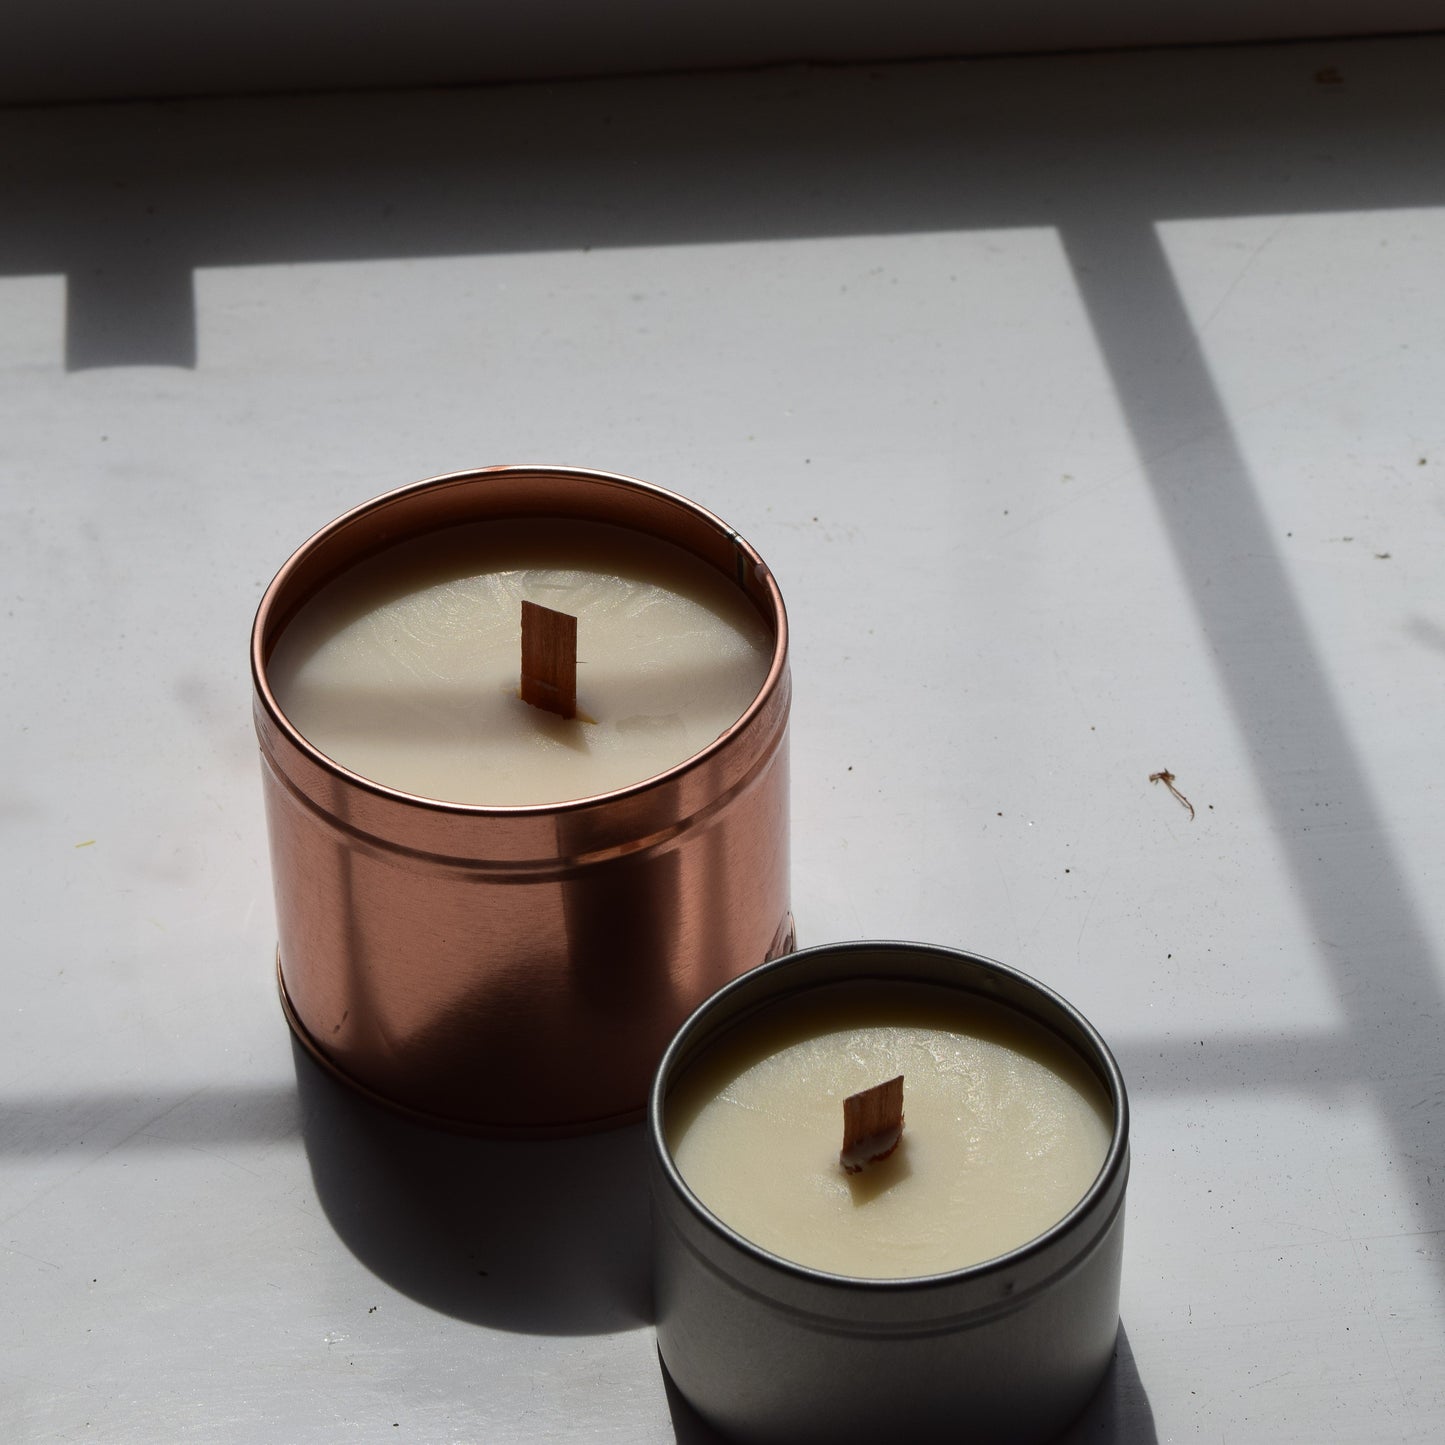 Hush CBD candle. CBD candles are the highest rated calming candles. All our candles are hand crafted and made using exclusively sustainable products. We travel around Cornwall markets. Available to bulk buy, white label and wholesale. CBD infused candle.